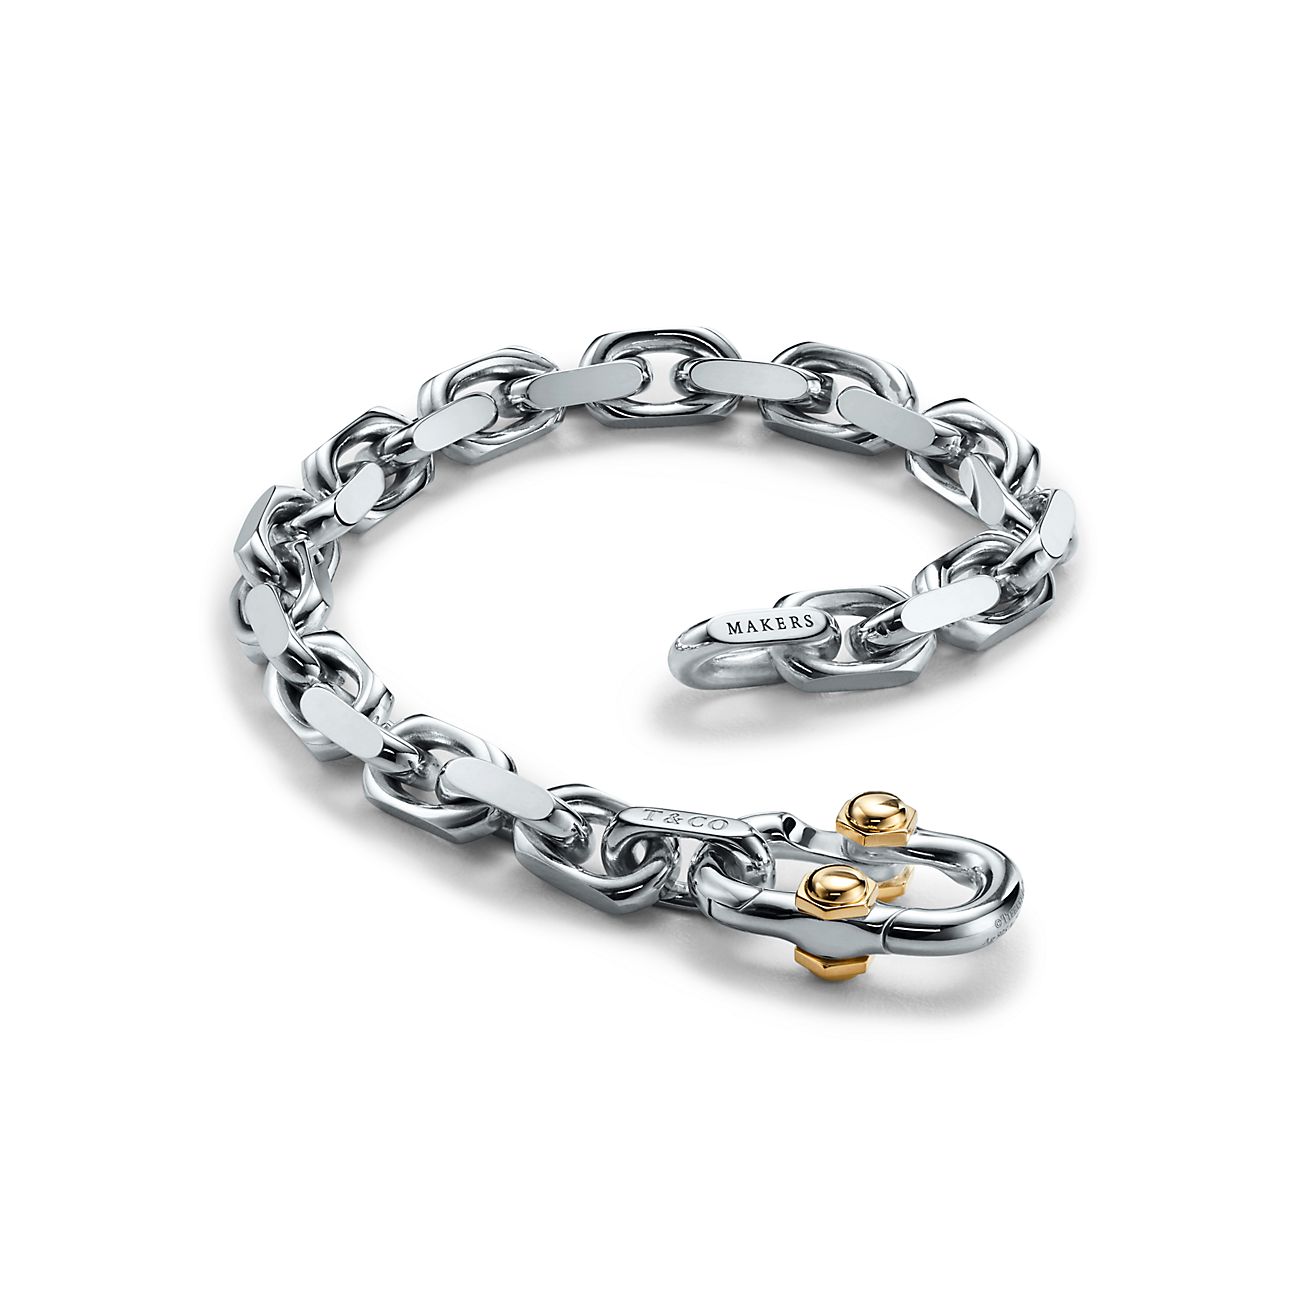 Tiffany 1837® Makers Wide Chain Bracelet in Sterling Silver and 18k Gold